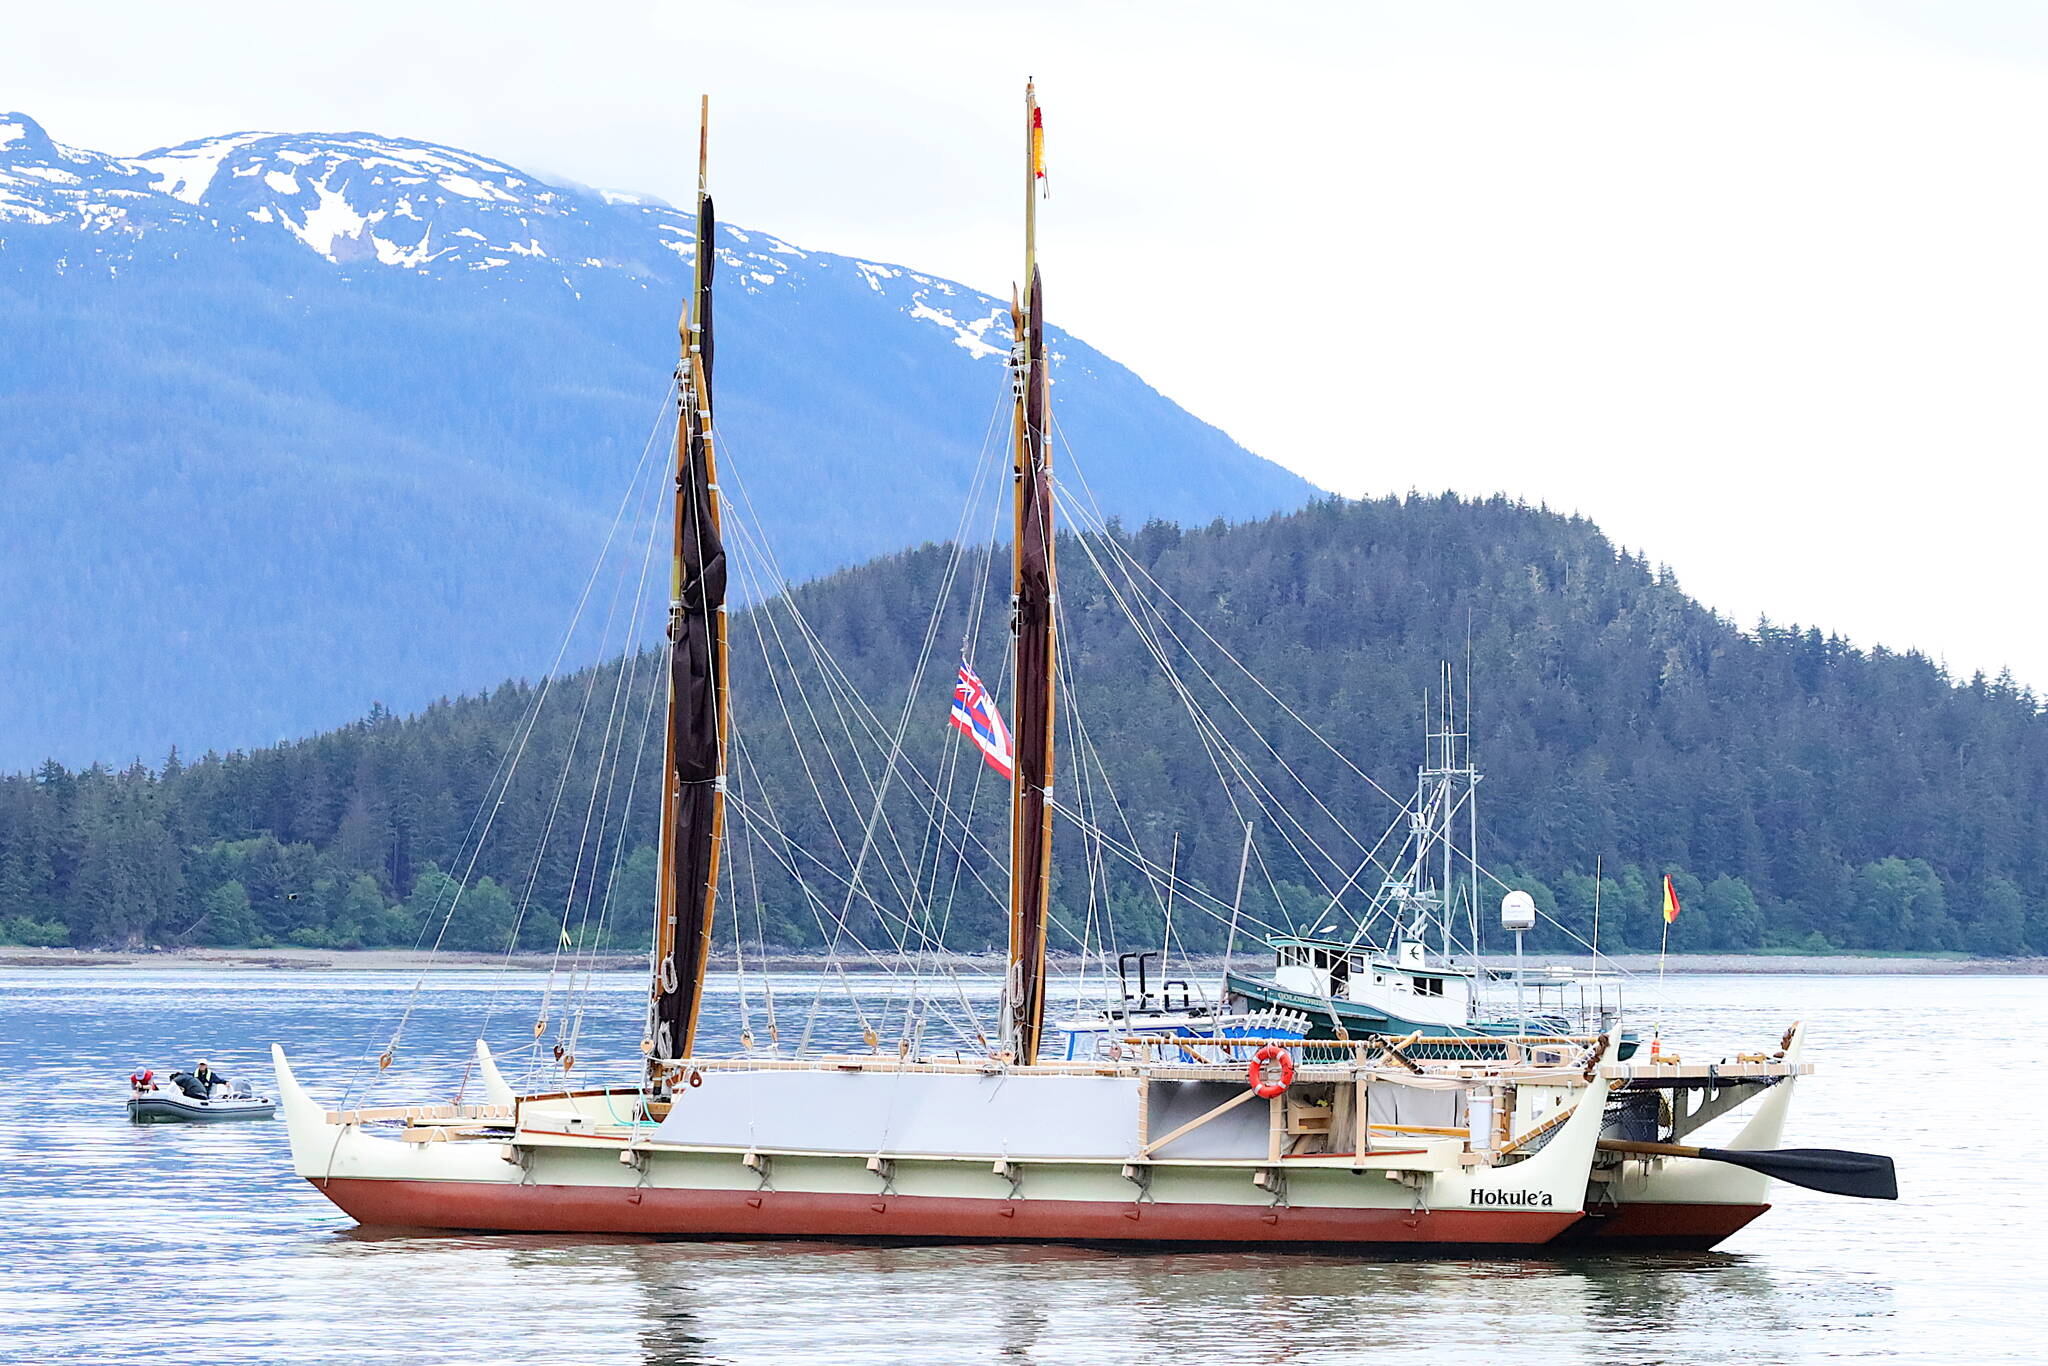 The Hōkūle‘a arrives in Auke Bay on June 11, where it was welcomed by hundreds of Juneau residents and tribal leaders. The wind-powered traditional Polynesian voyaging canoe departed Juneau at about 4:15 a.m. Sunday to begin a scheduled 47-month global voyage. The originally scheduled start of the trip was delayed from Thursday due to poor weather. (Clarise Larson / Juneau Empire)